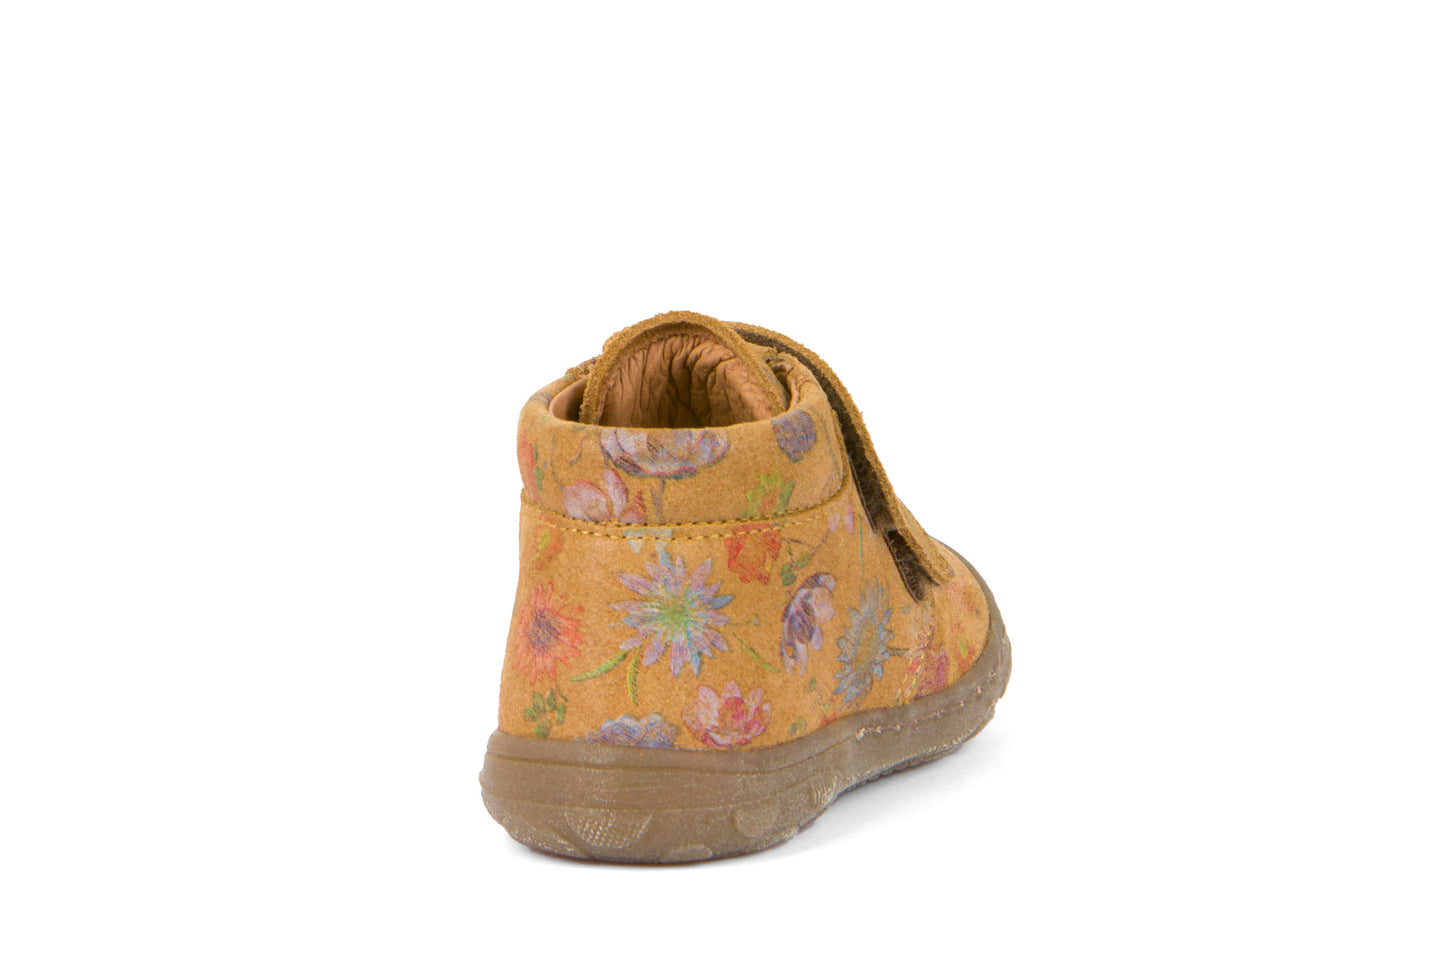 A girls boot by Froddo, style Kart Velcro | G2130272-11 in yellow flower print and double velcro fastening. Back view.